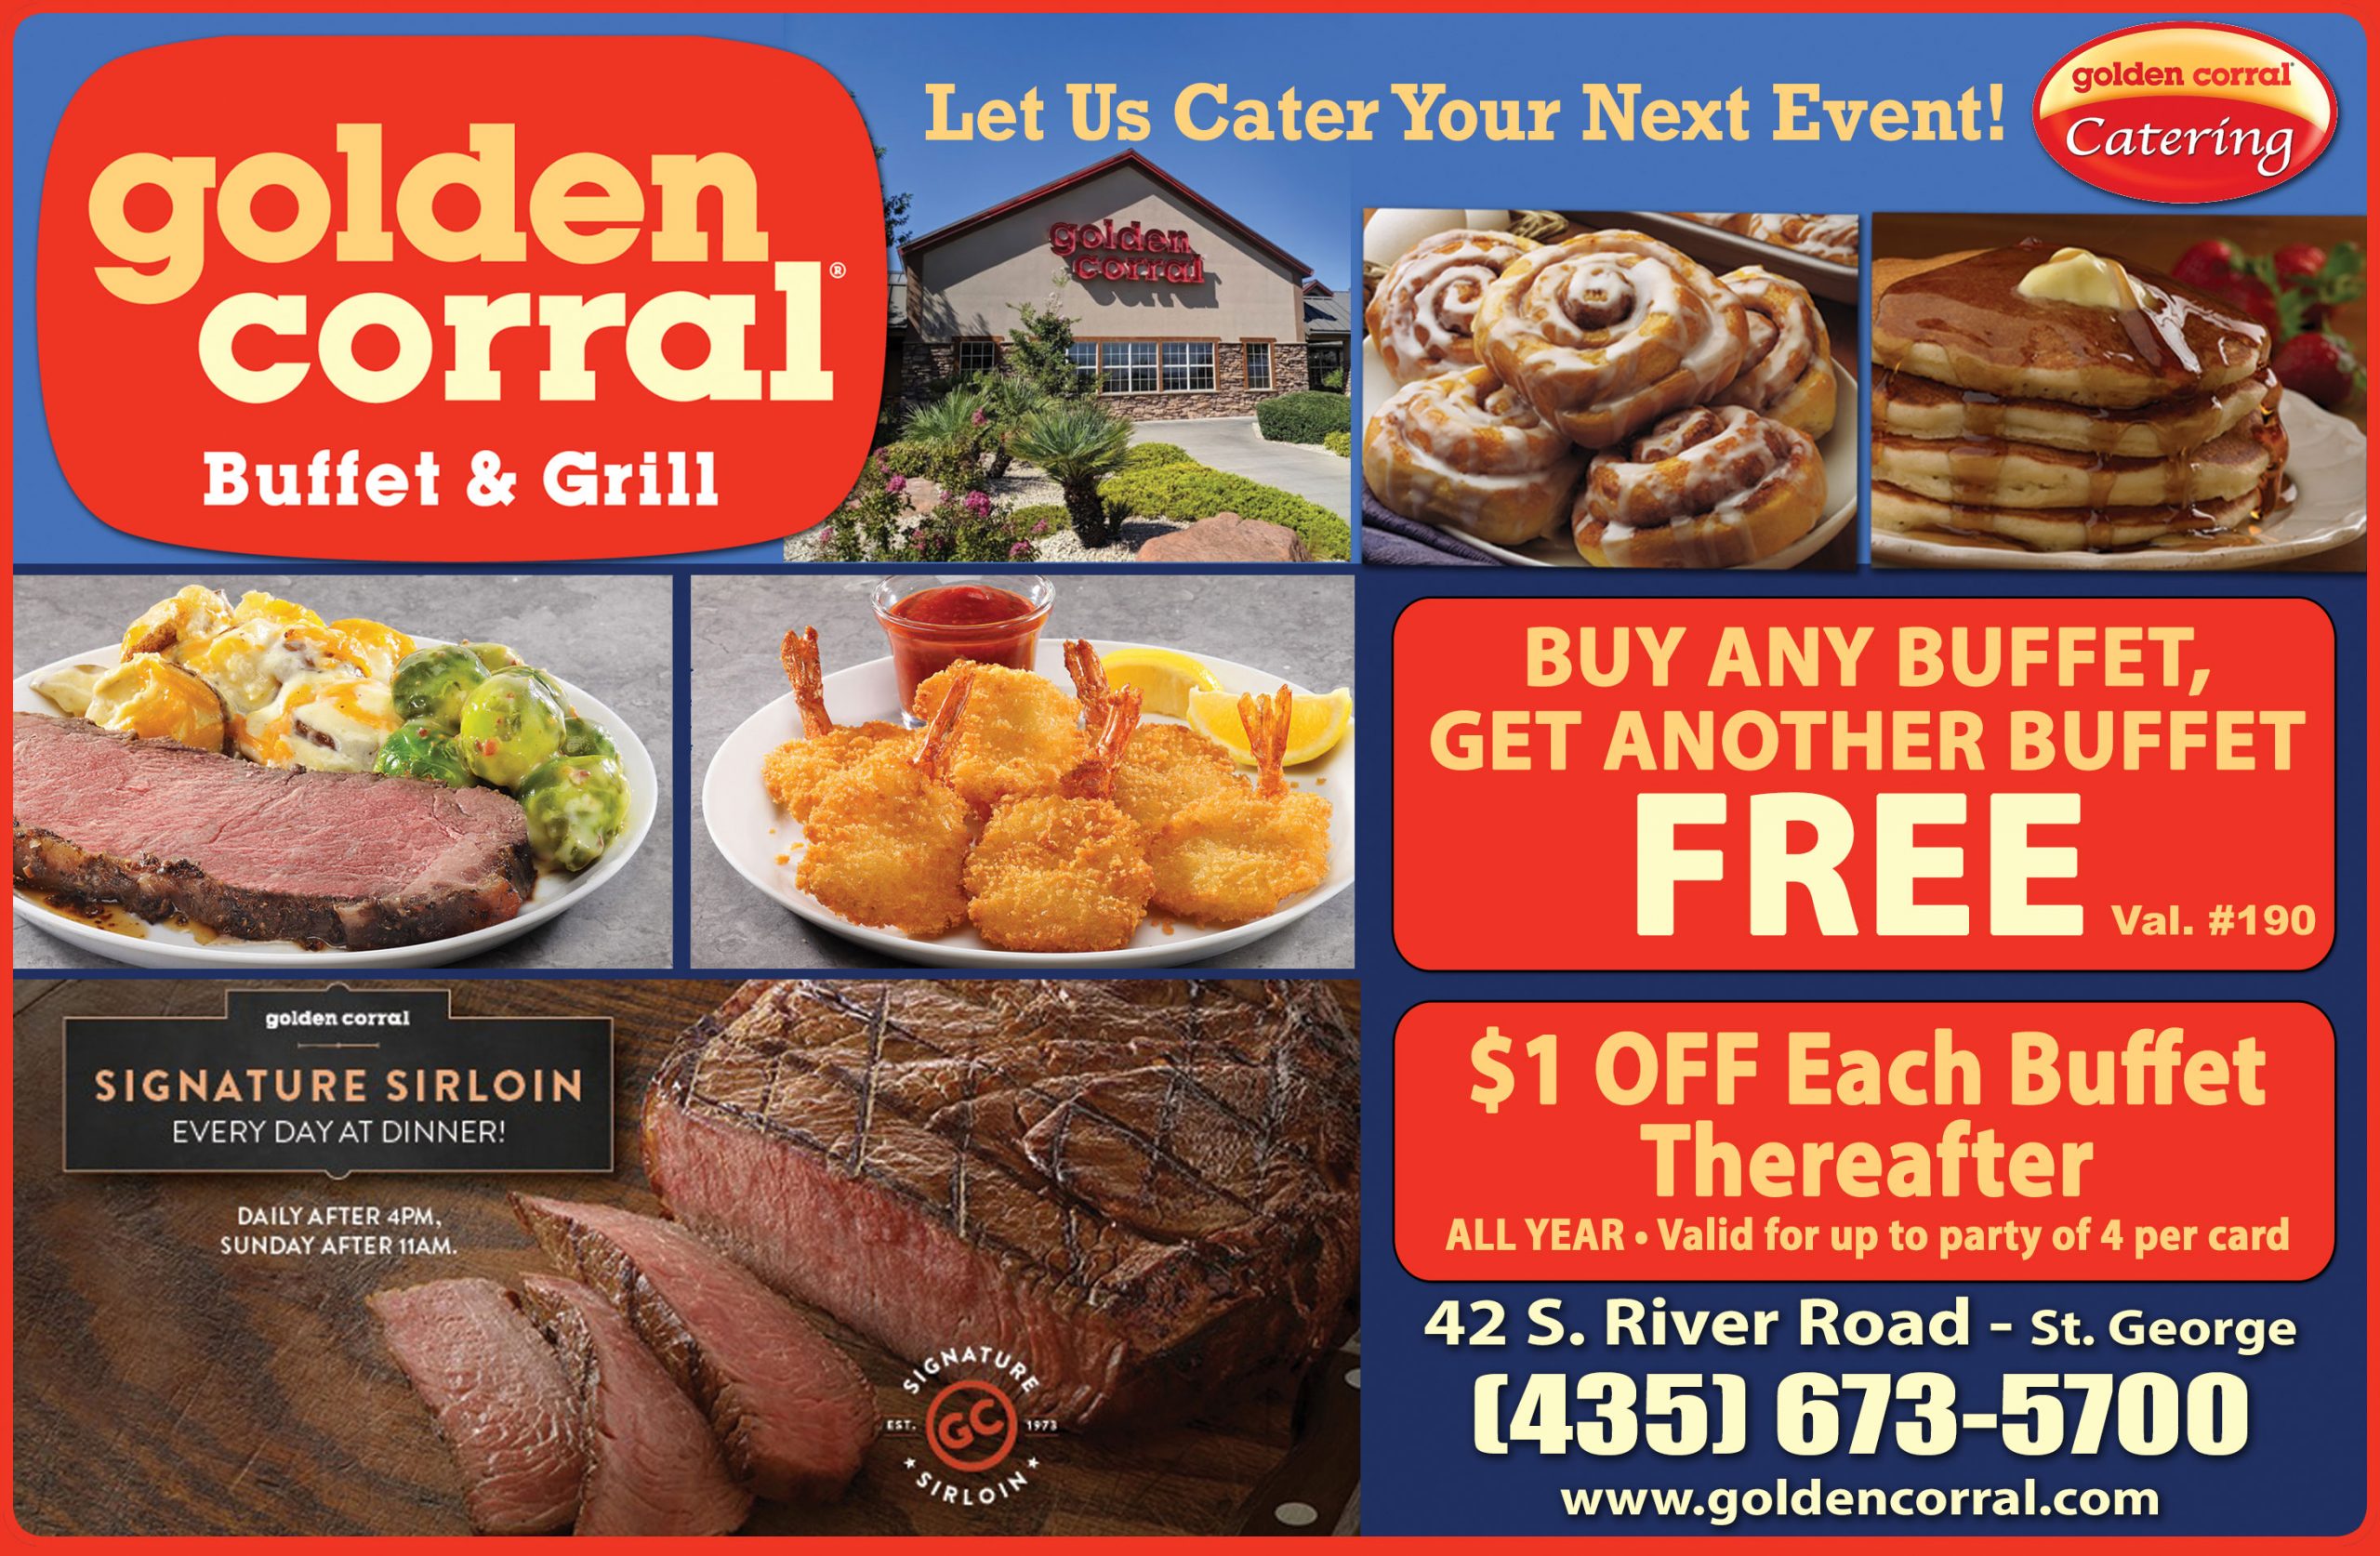 golden corral - buffet where you can eat all day